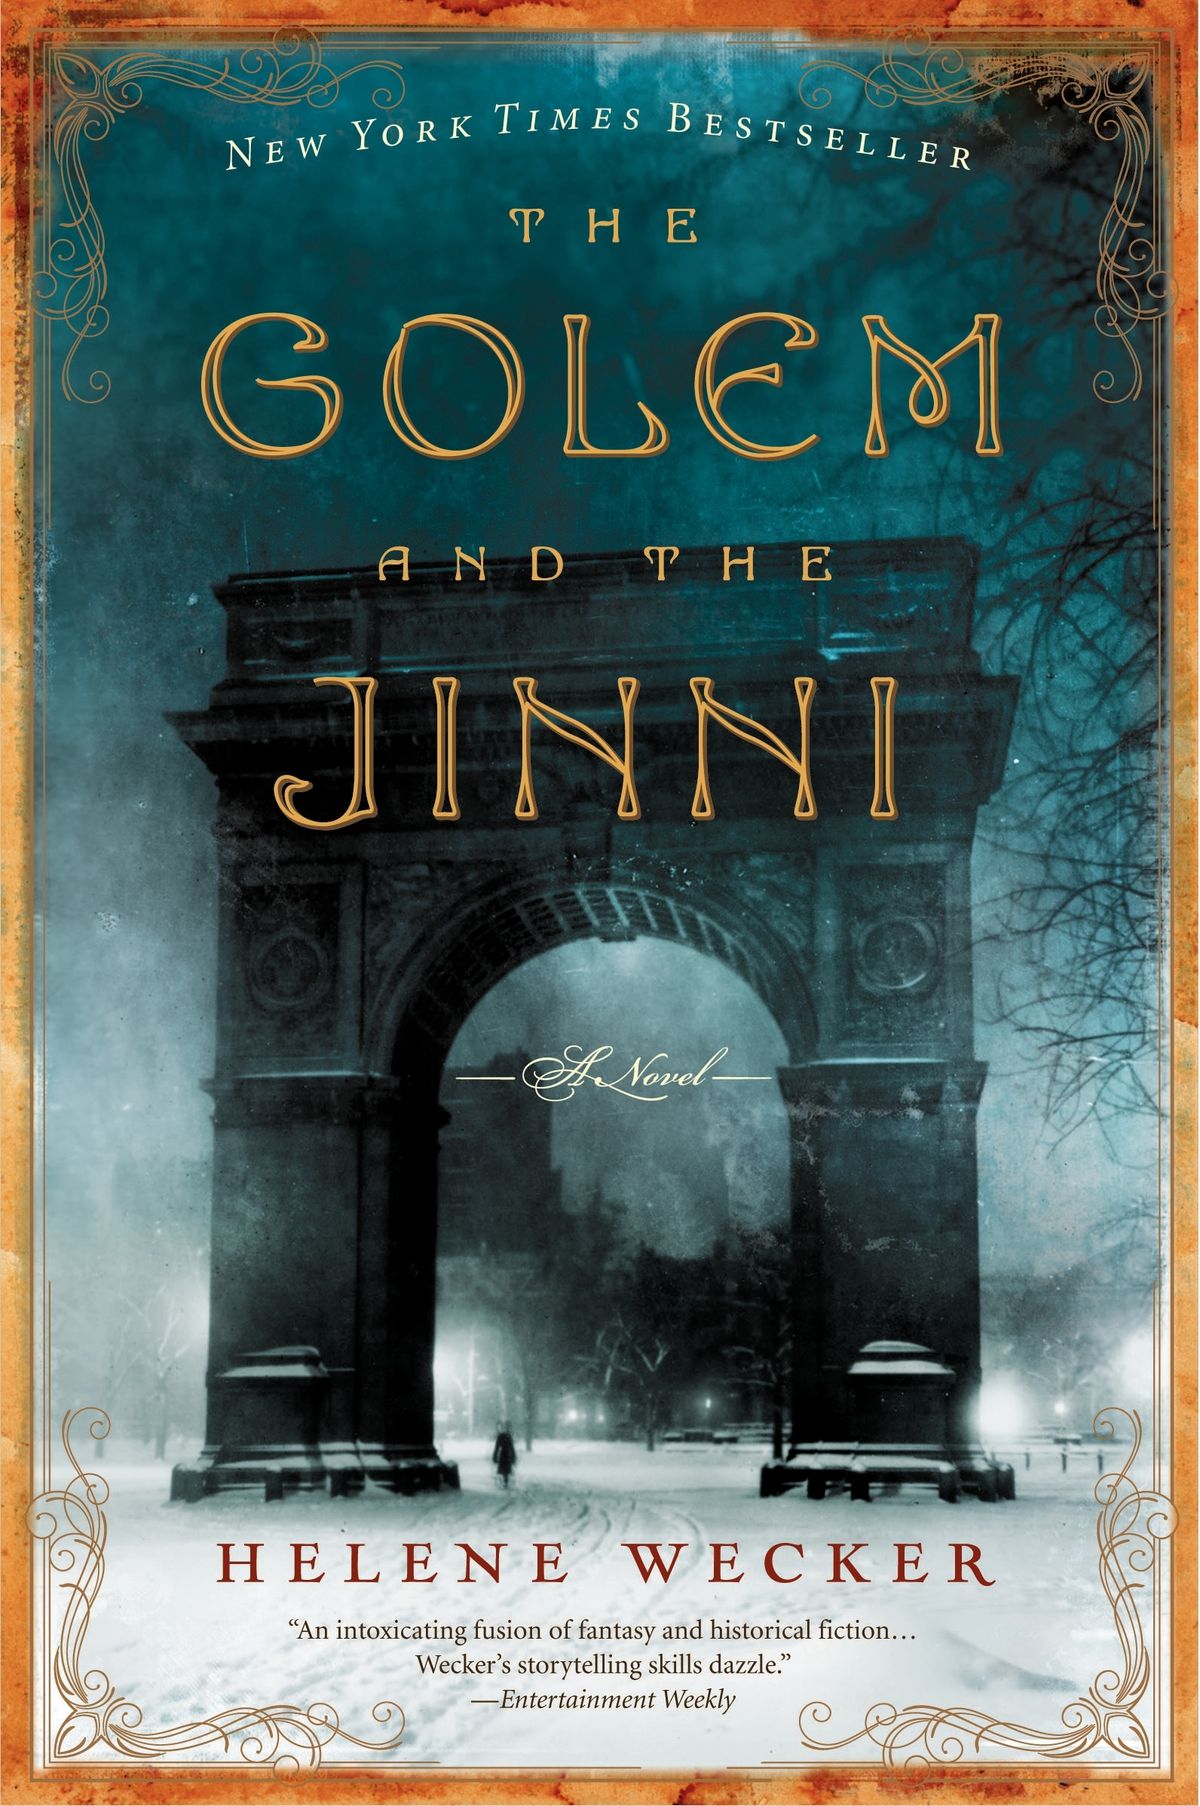 The cover of Helene Wecker’s The Golem and the Jinni